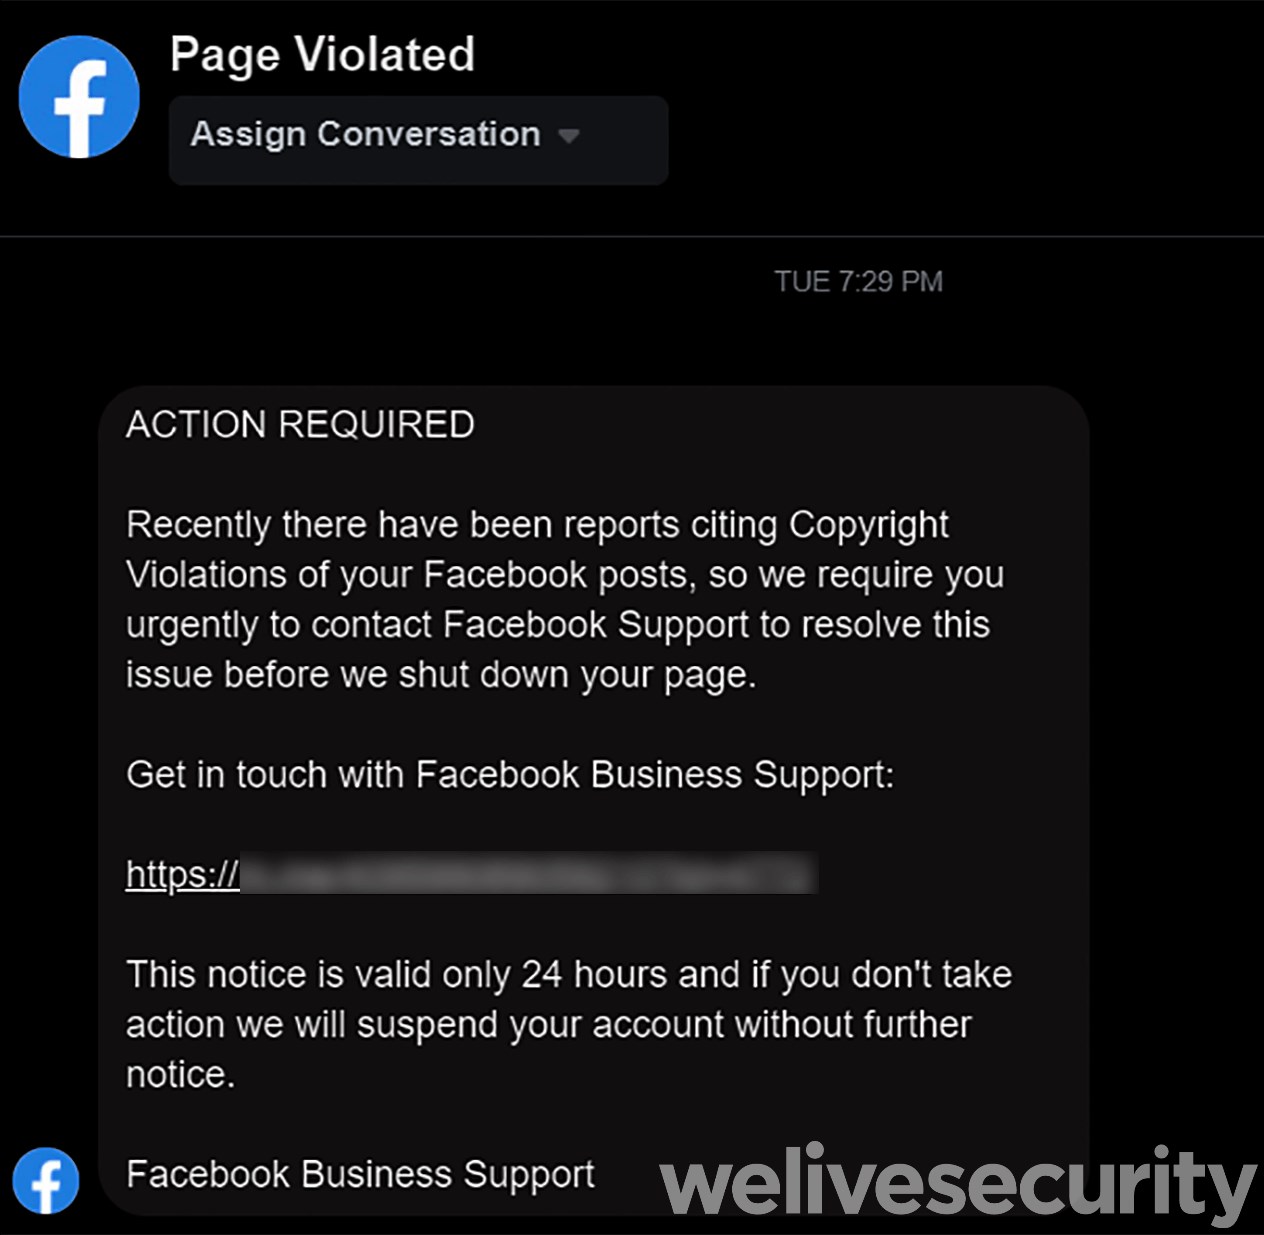 Scam alert: Facebook phishing attempts making the rounds